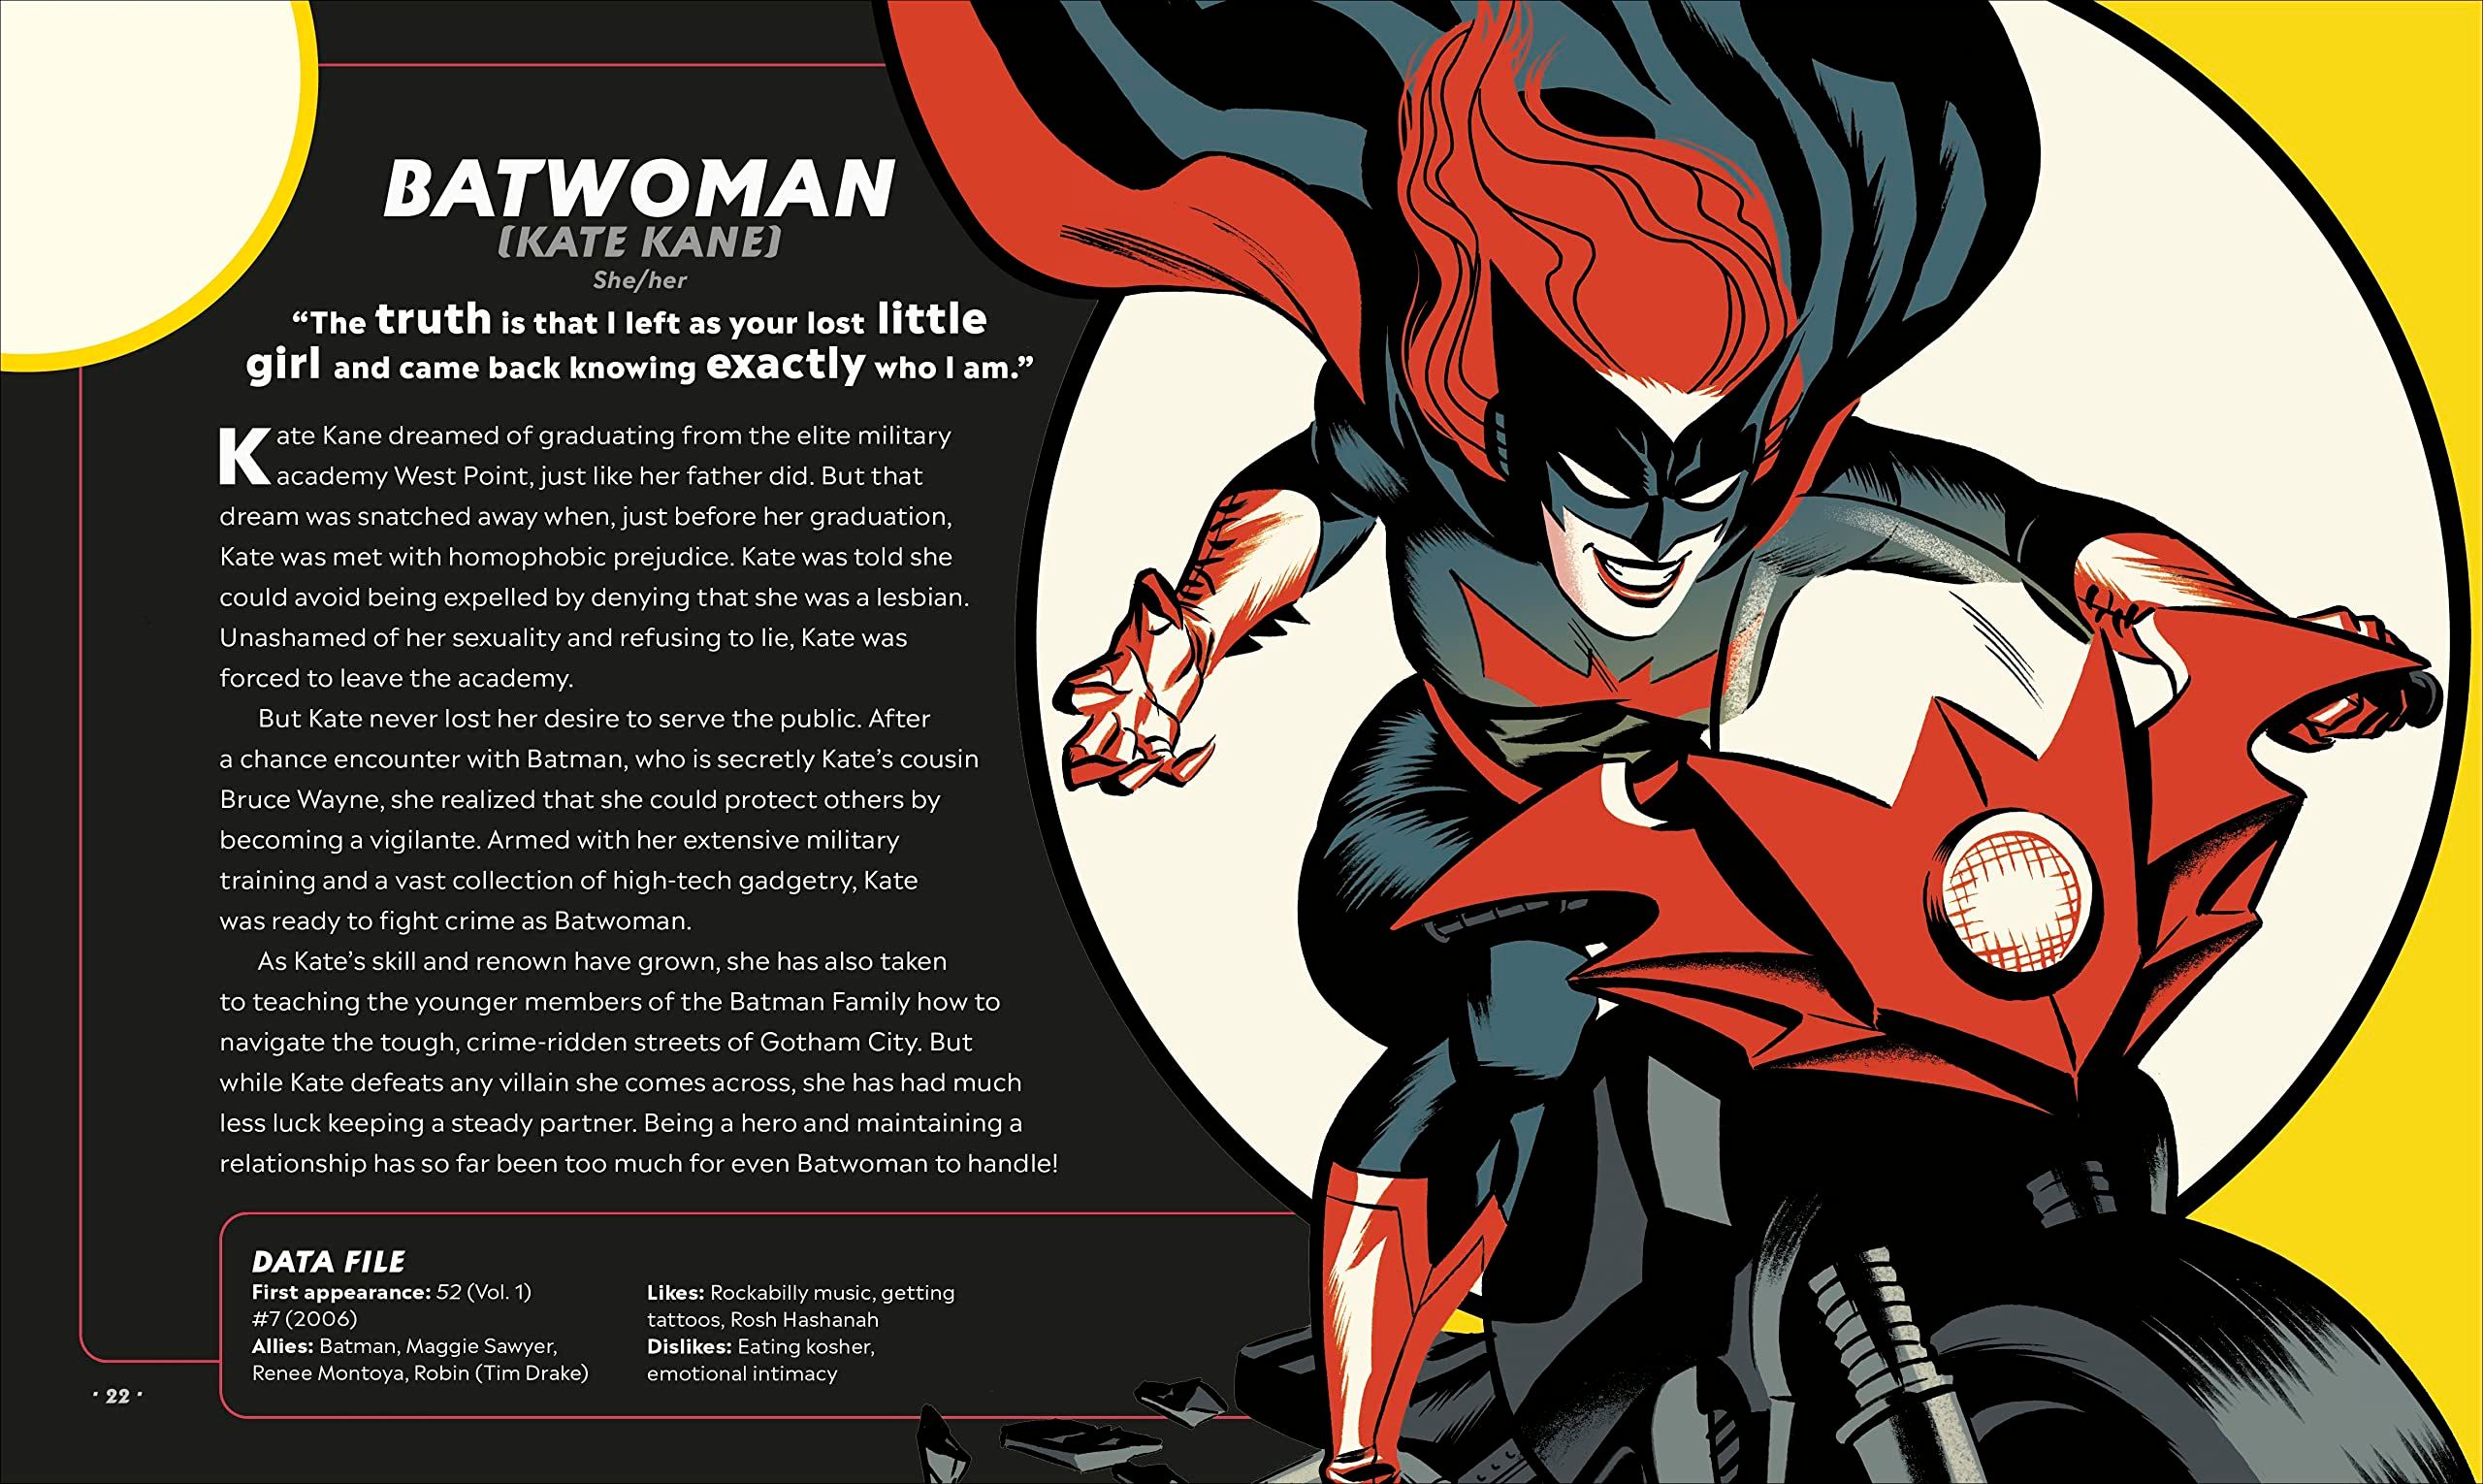 The DC Book of Pride - Batwoman